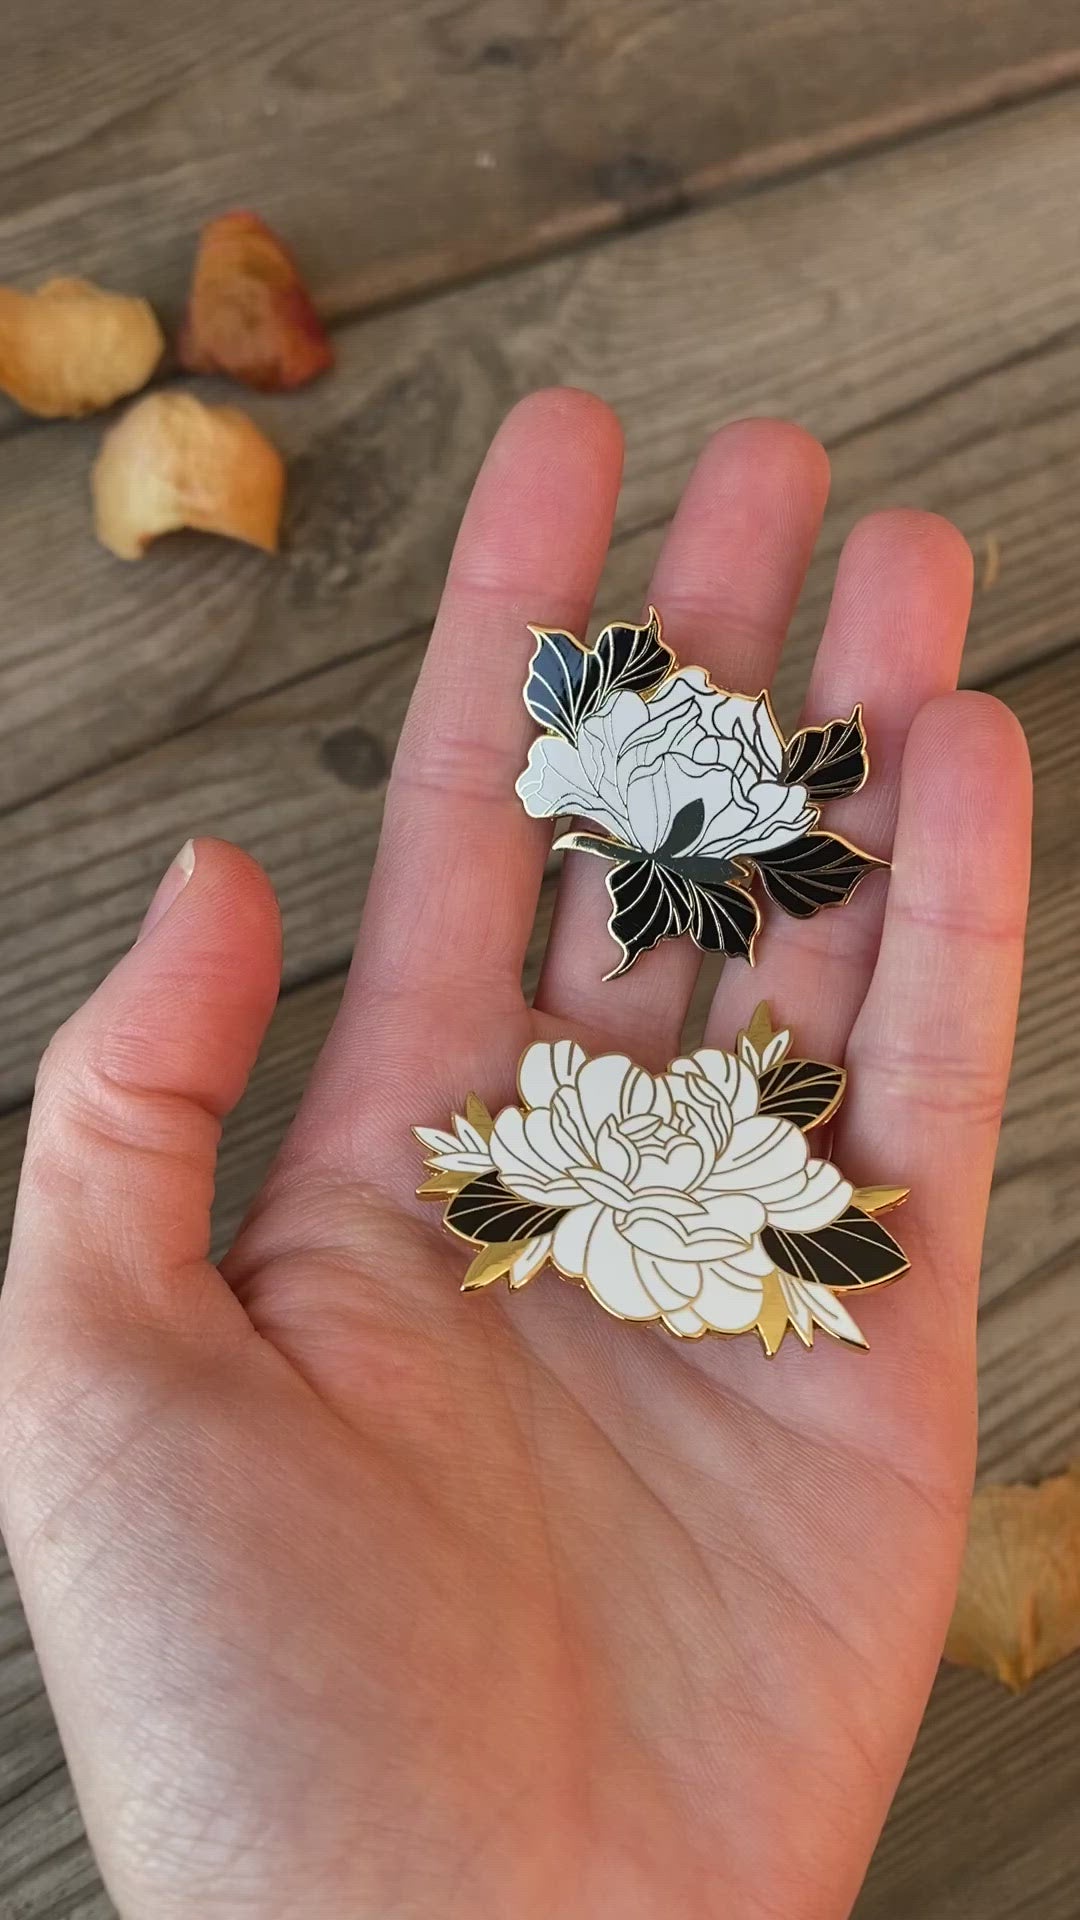 Floral enamel pins on hand, made by Lu Loram-Martin